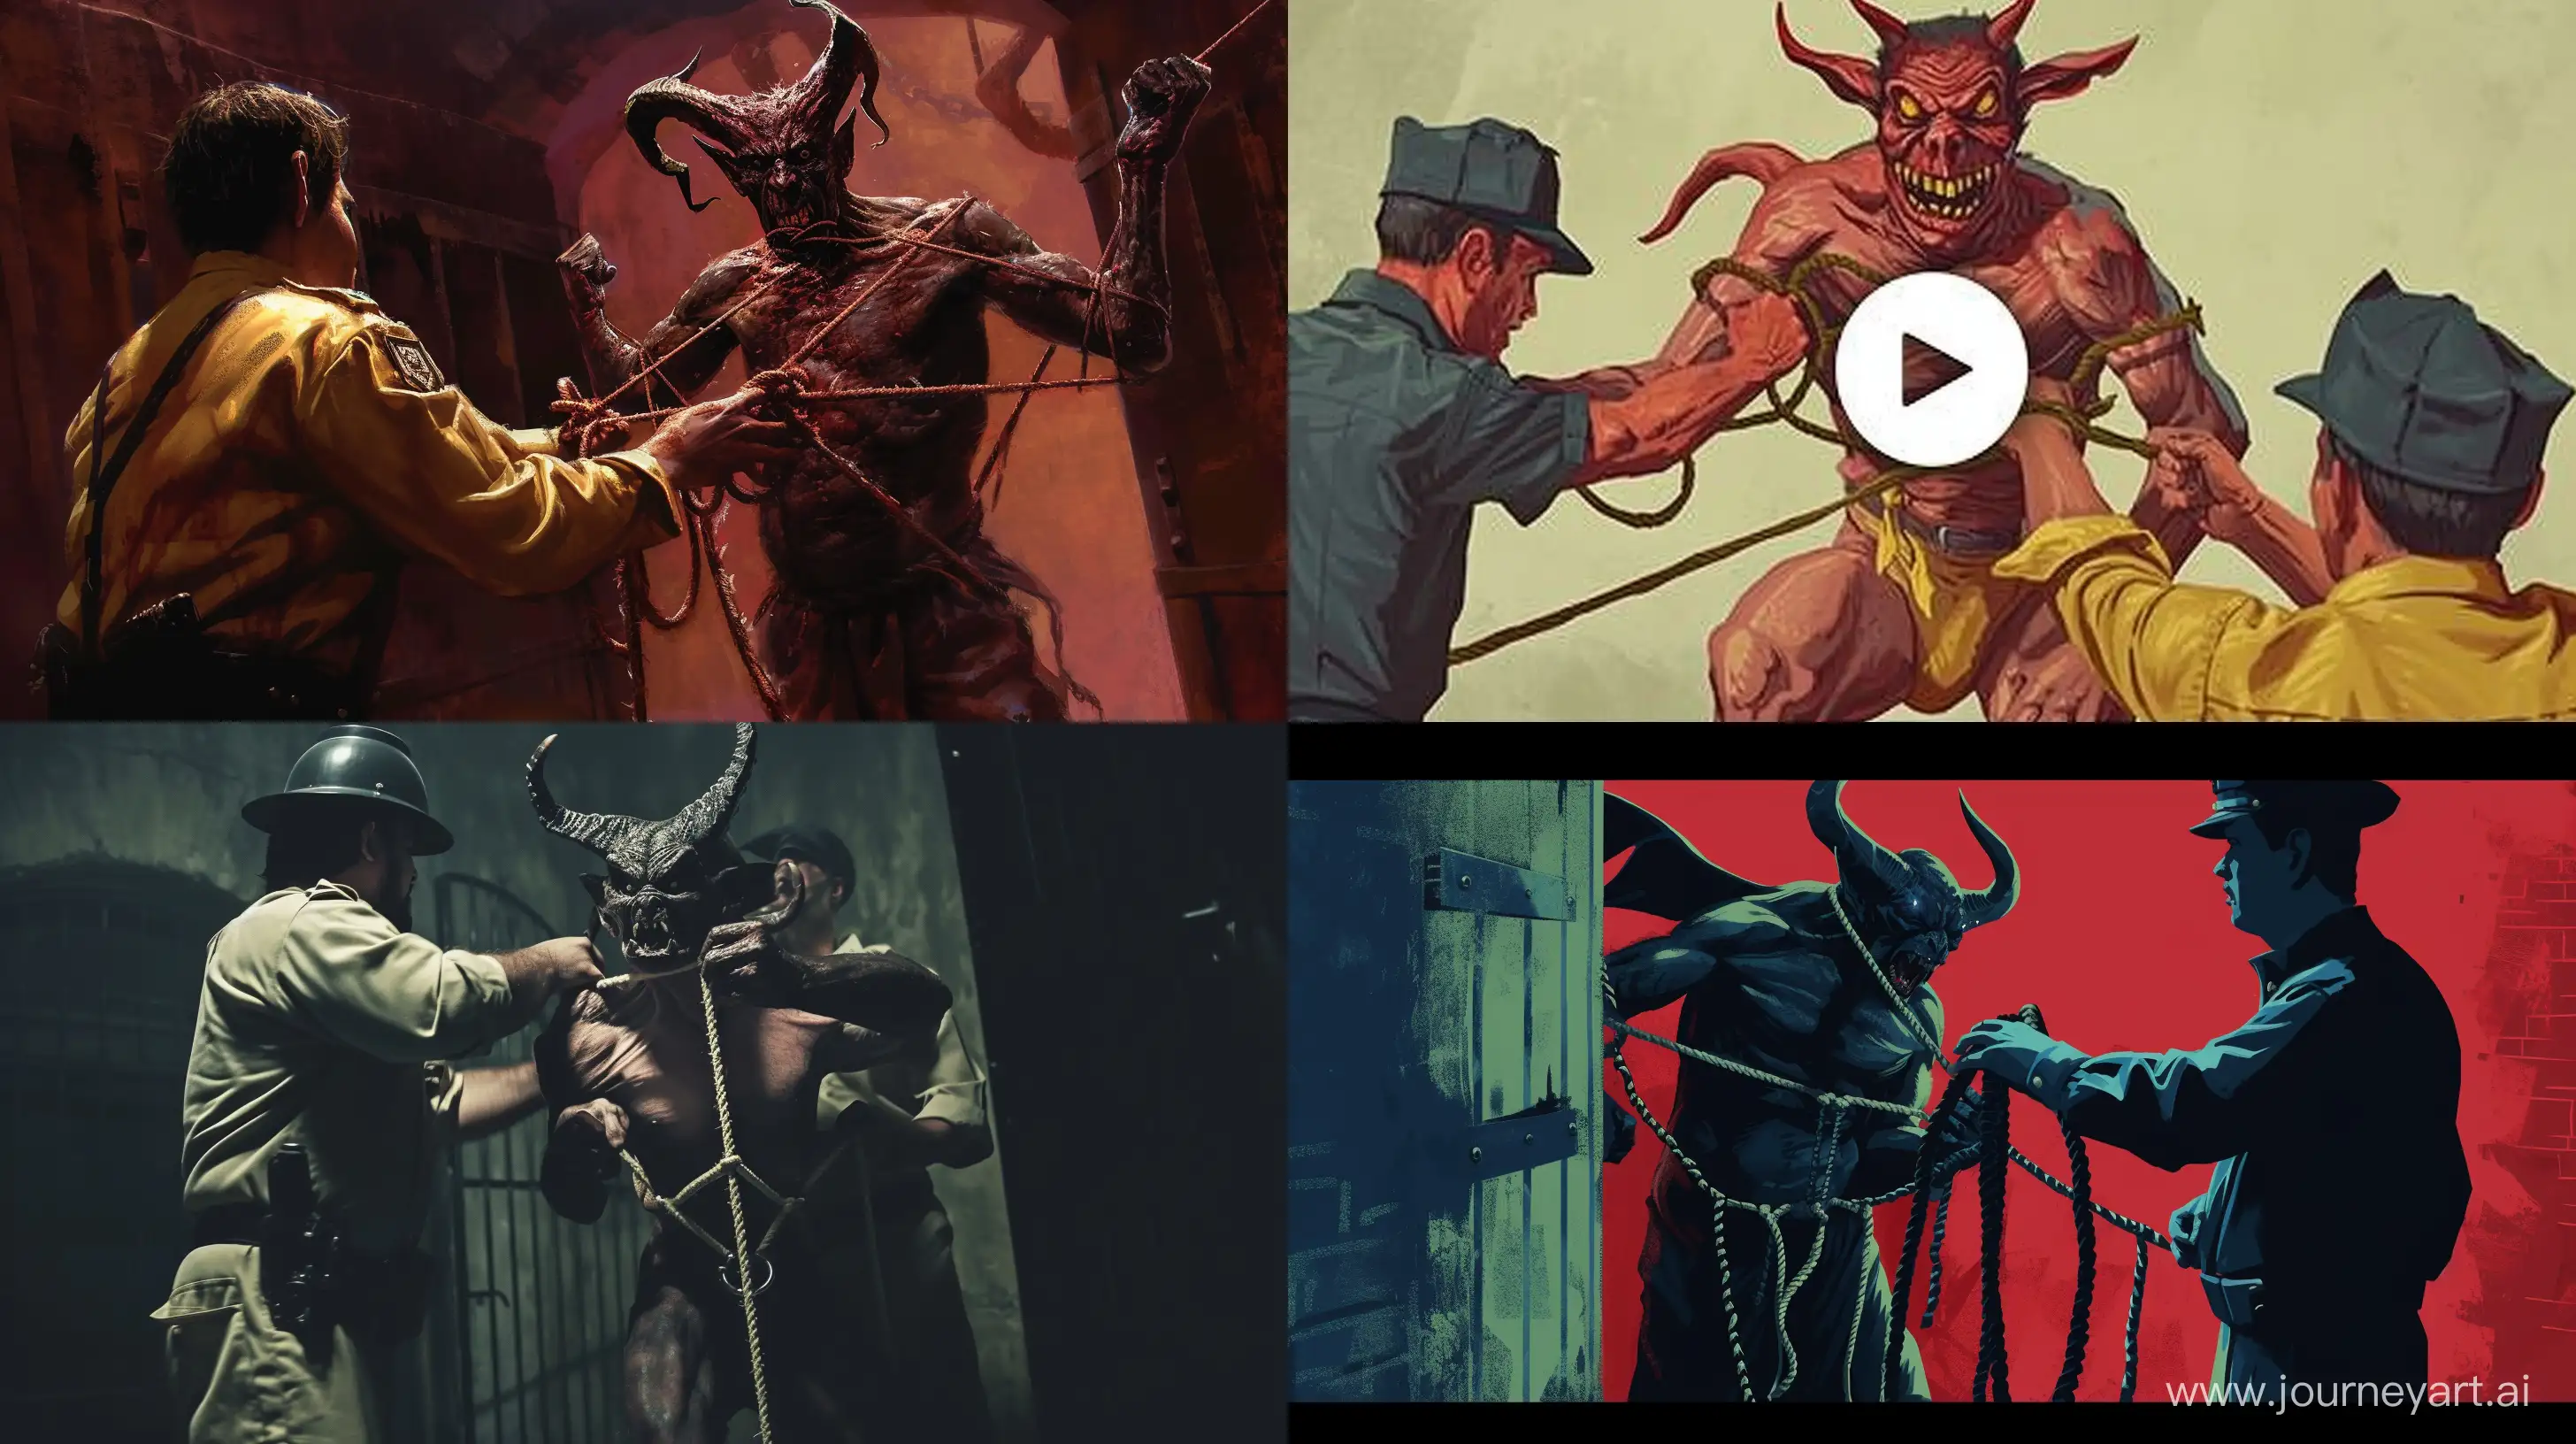 A thumbnail image for YouTube, in which a demon is tied up and a guard is tying him up, --ar 16:9 